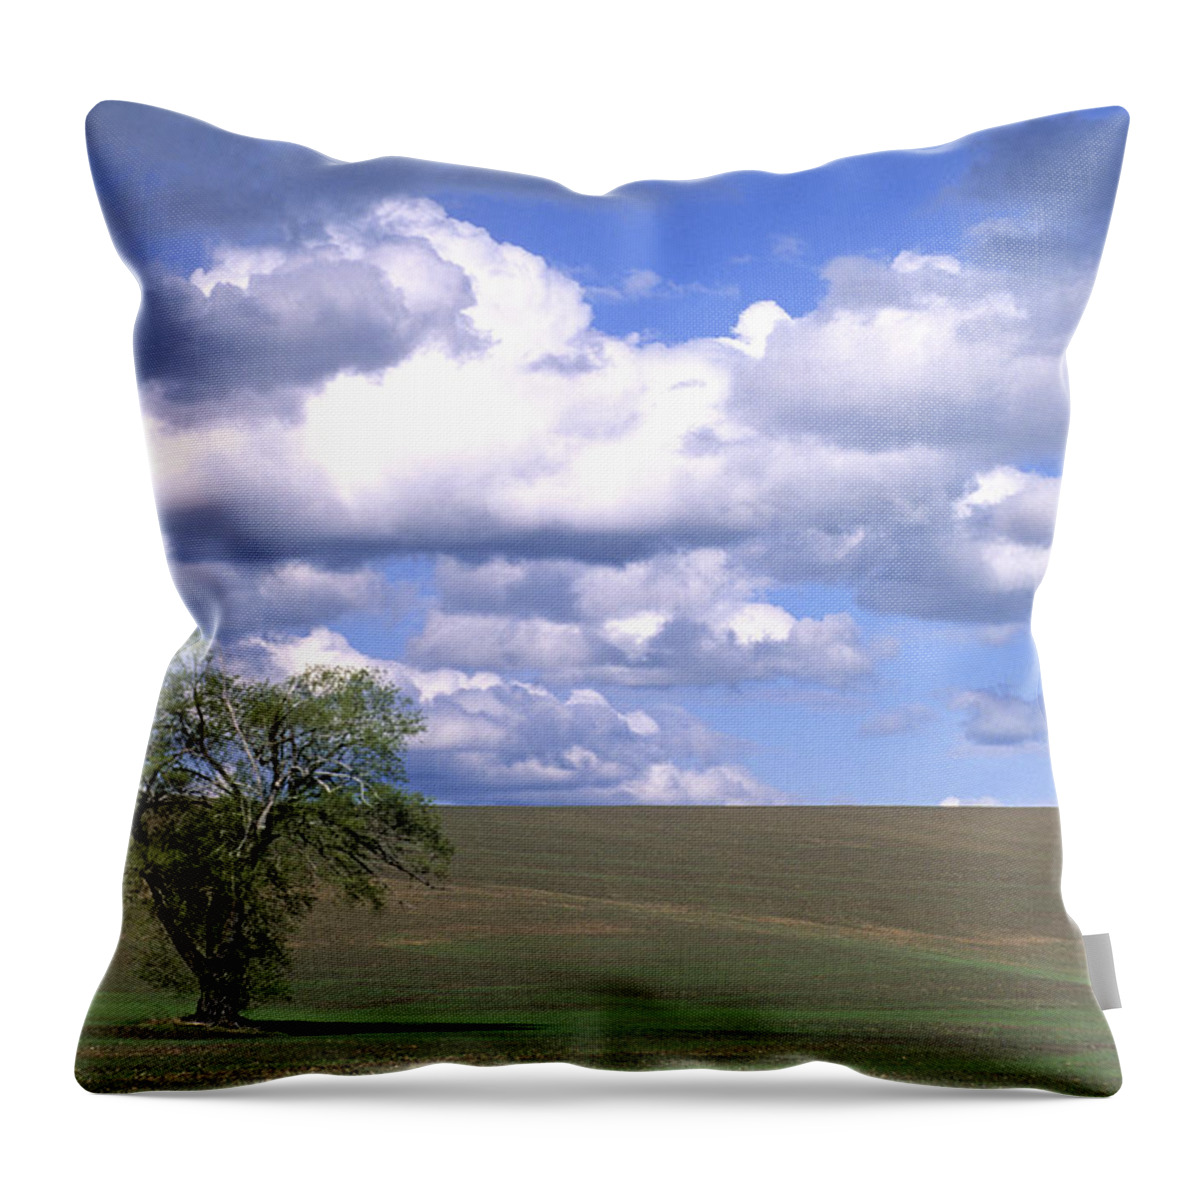 Outdoors Throw Pillow featuring the photograph Summer Flack Tree by Doug Davidson